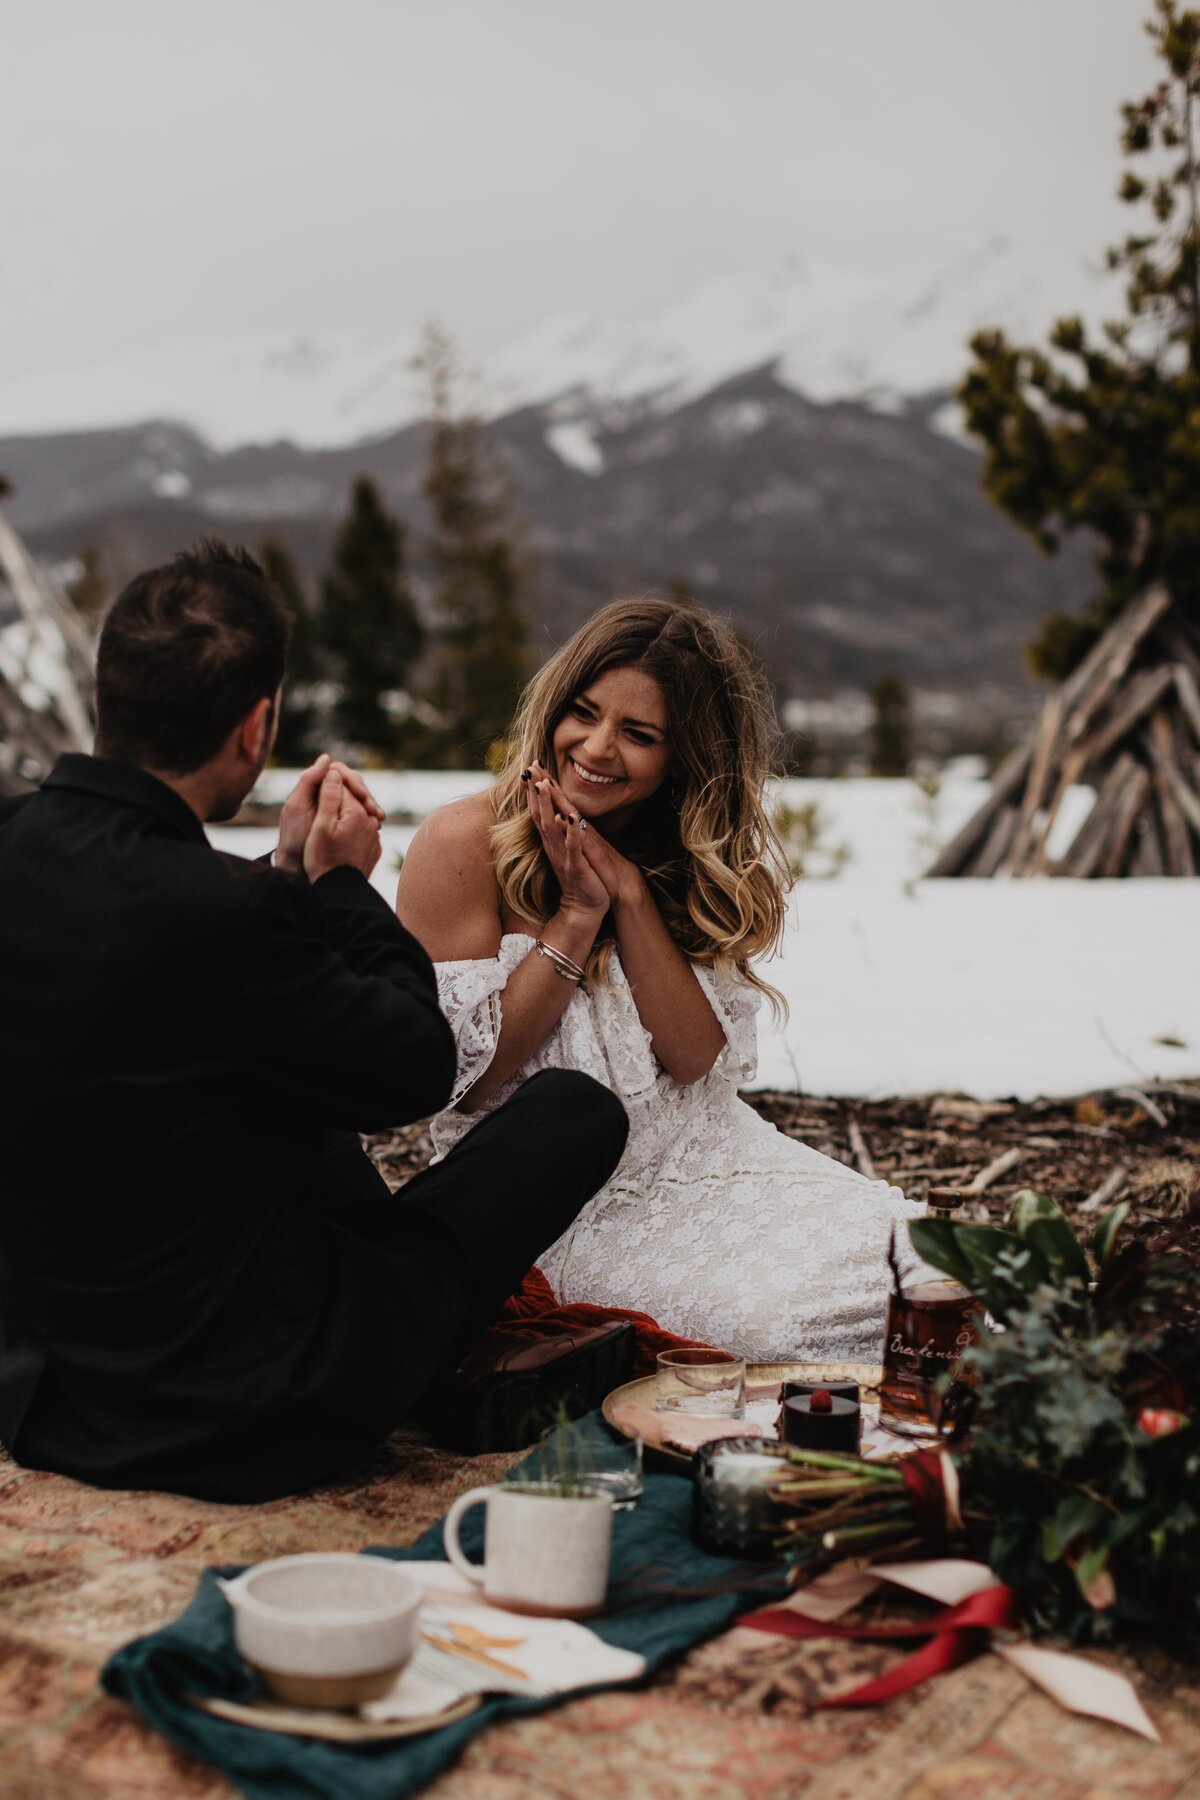 Adventure elopement in Breckenridge, Colorado photographed by Magnolia and Ember.